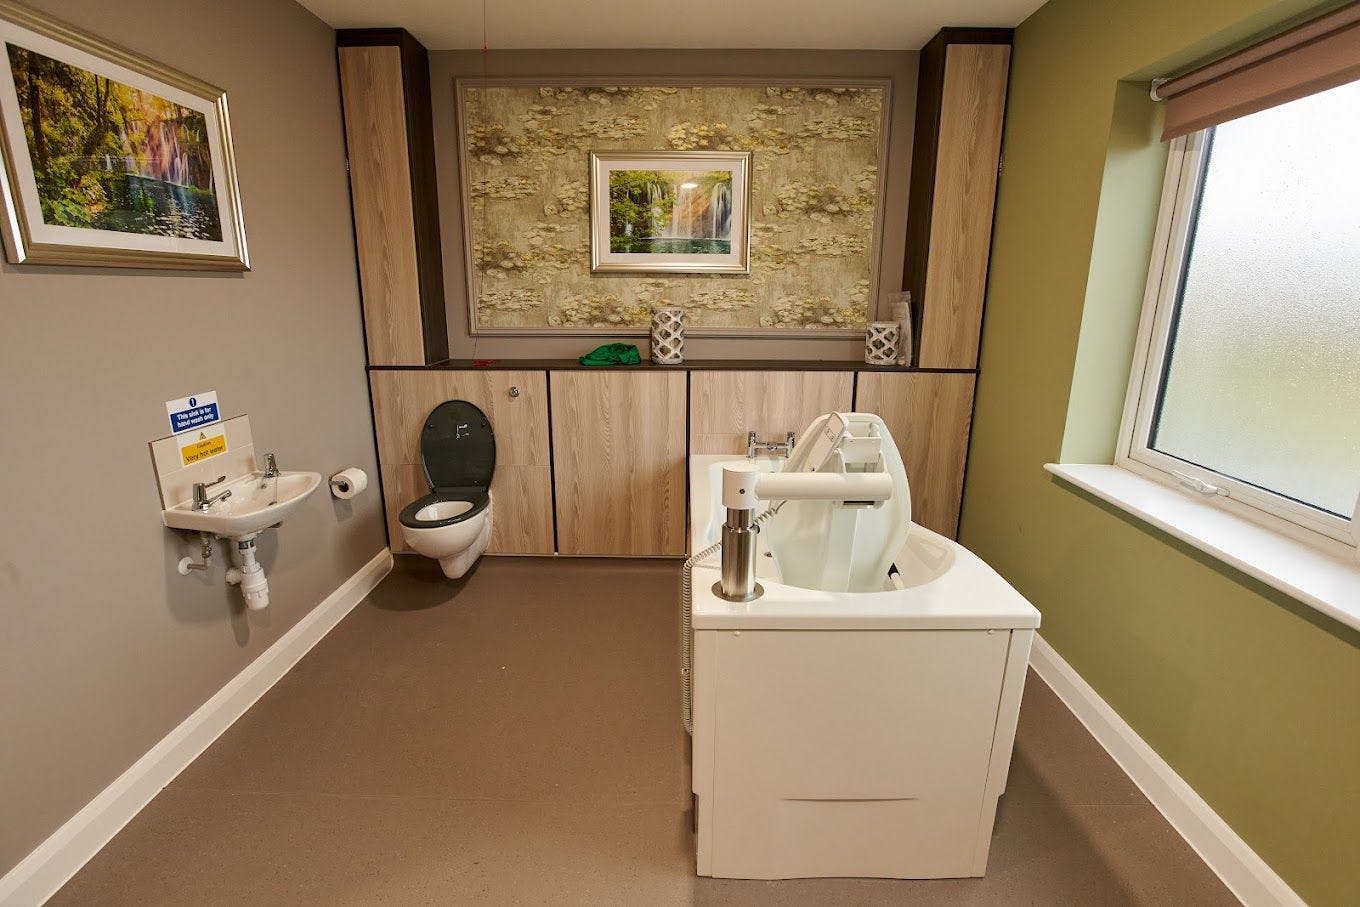 Bathroom of Nodens Manor care home in Lydney, Gloucestershire